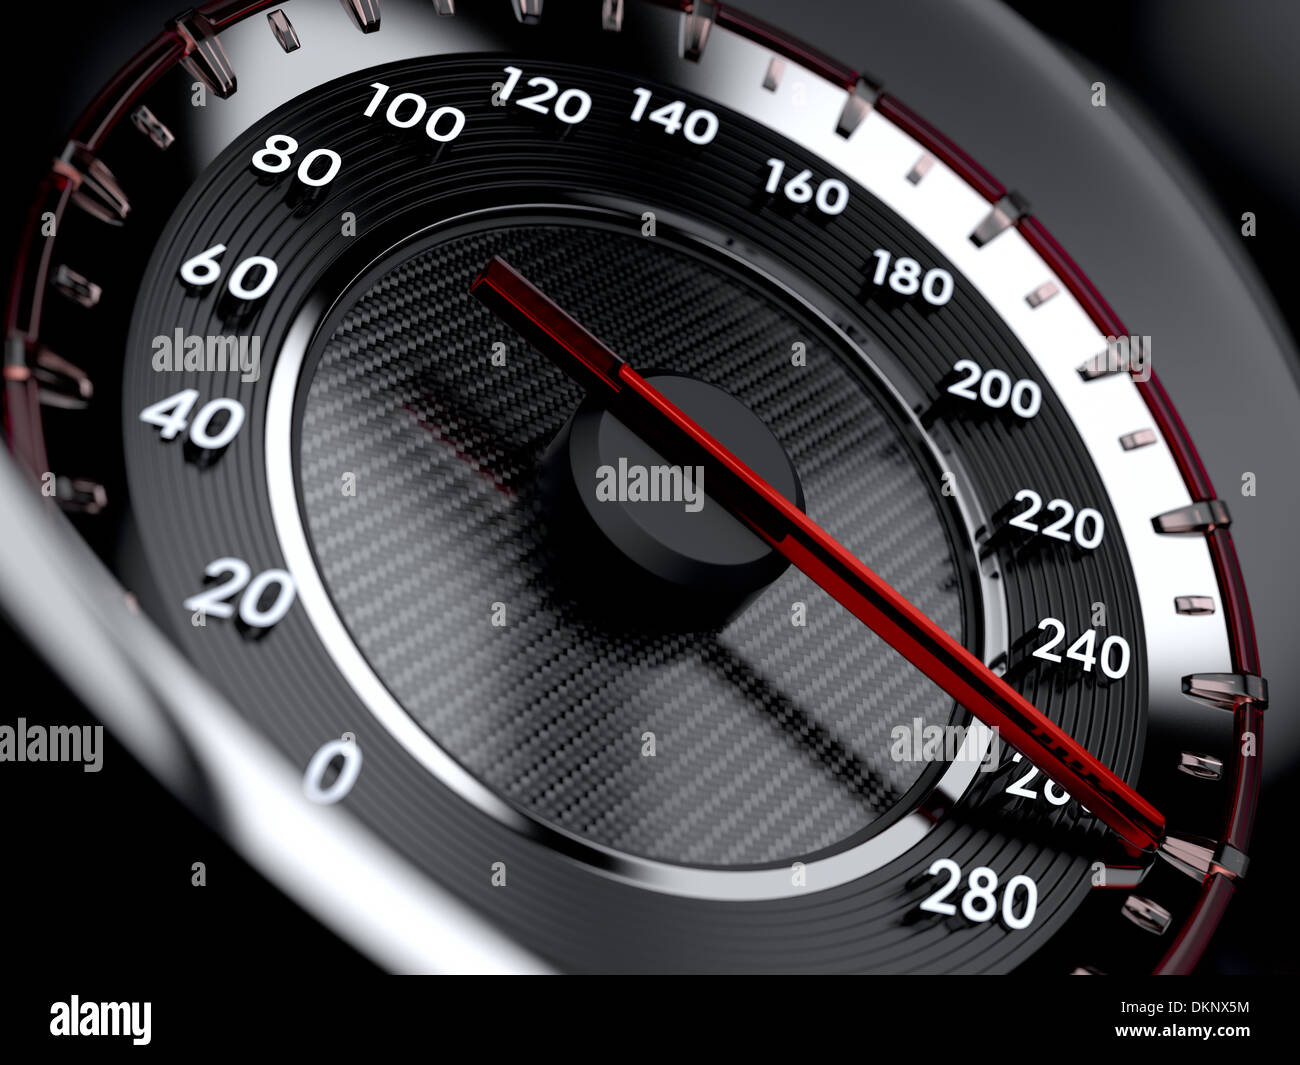 3d illustration of car speedometer. High speed concept Stock Photo